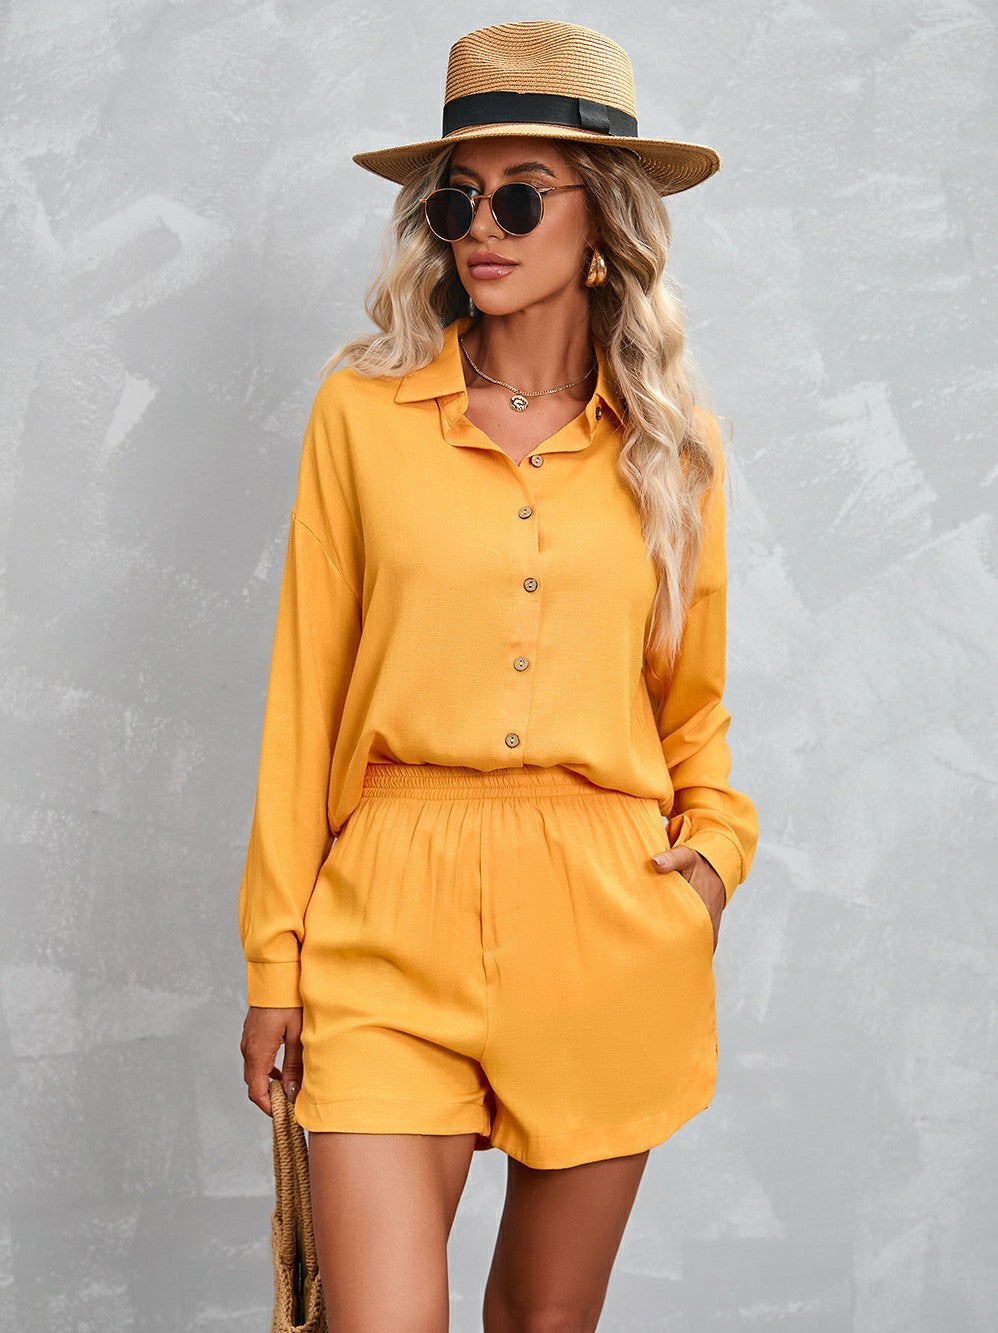 Solid Color Long Sleeve Shirt & Shorts Suit